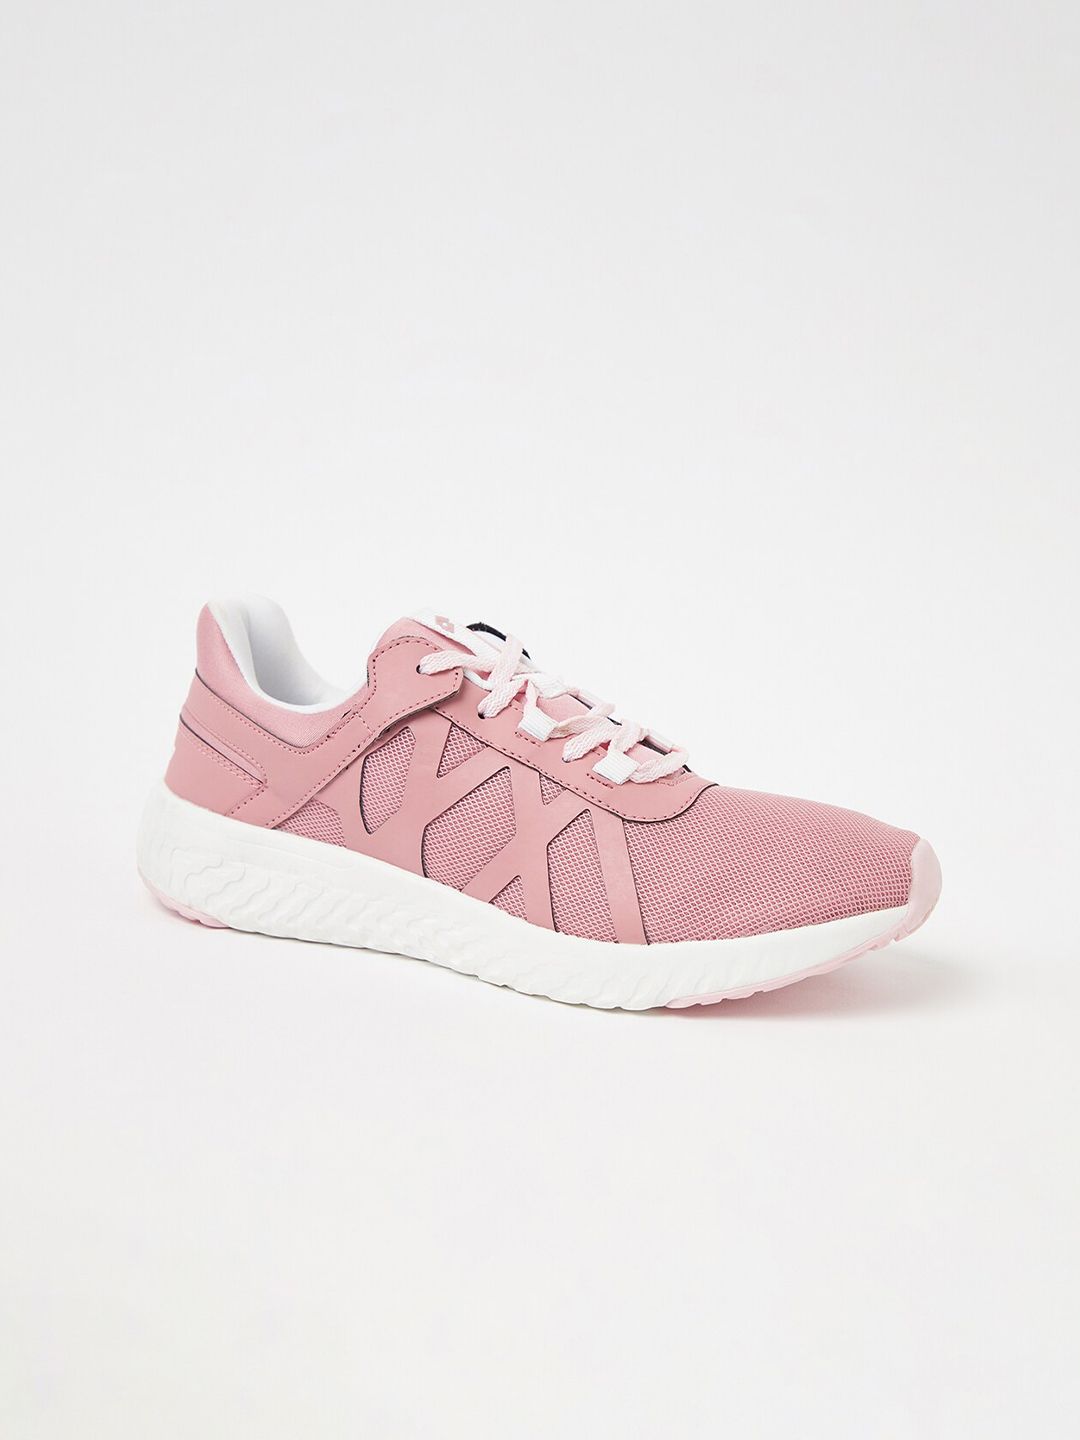 Lotto Women Pink Mesh Running Non-Marking Shoes Price in India